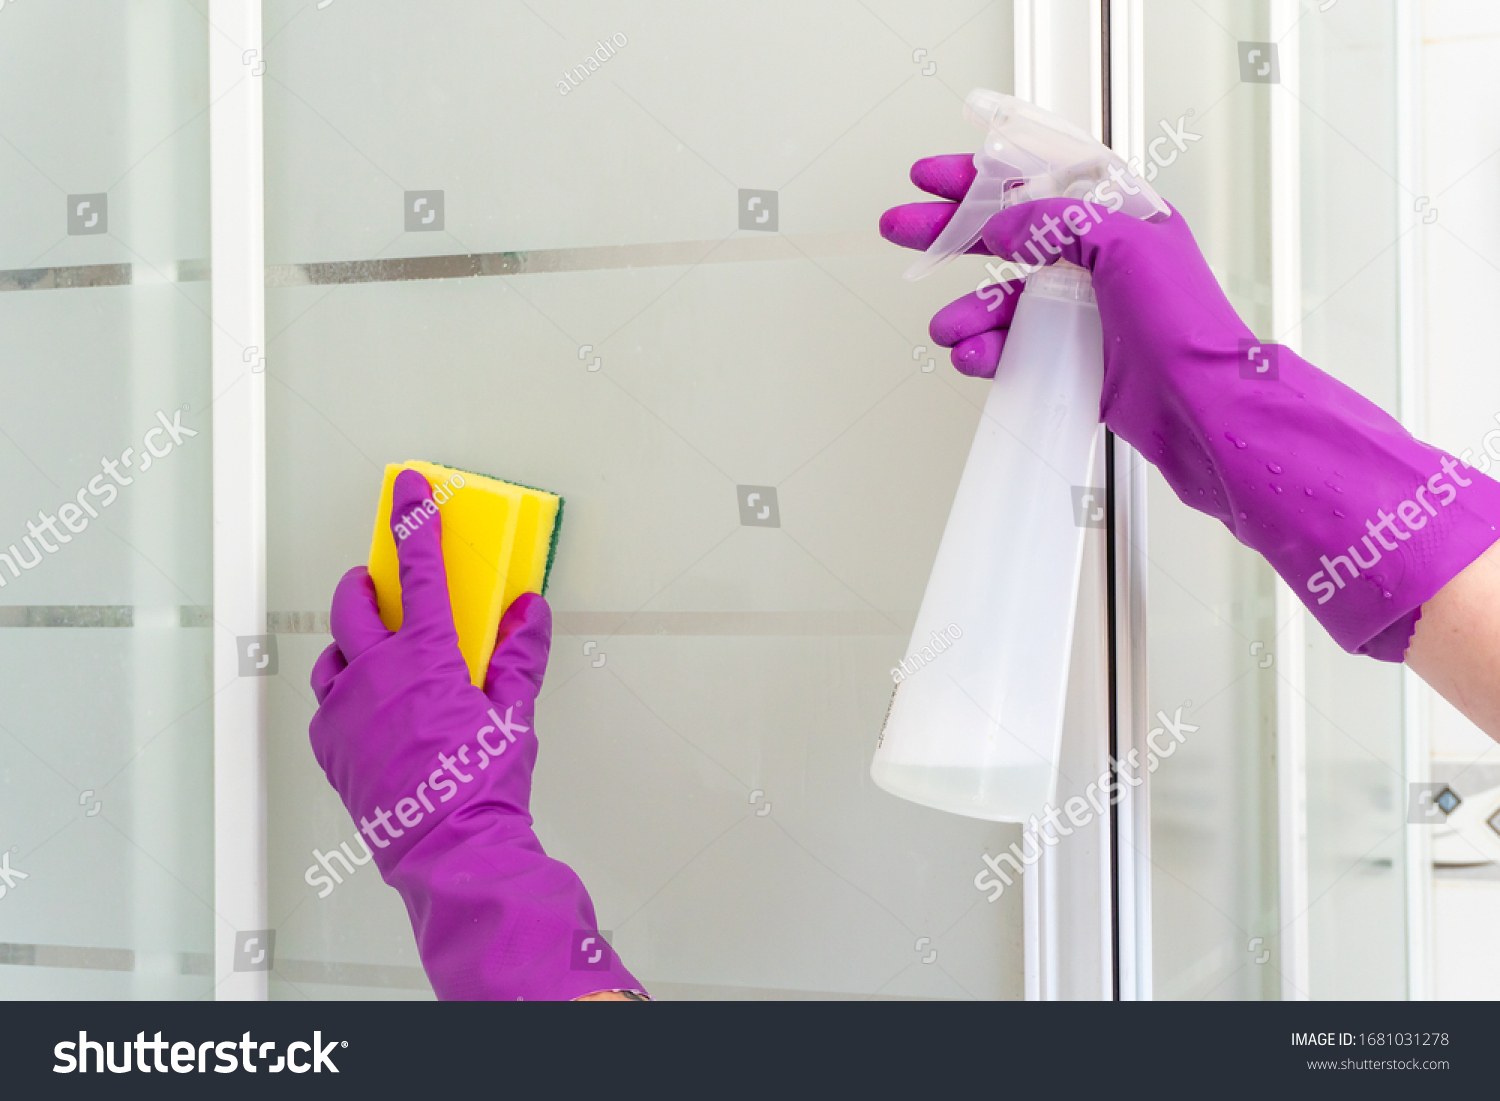 Female hands cleaning white, transparent shower cabin with yellow and green sponge and white spray bottle in bright, pink rubber gloves closeup. #1681031278